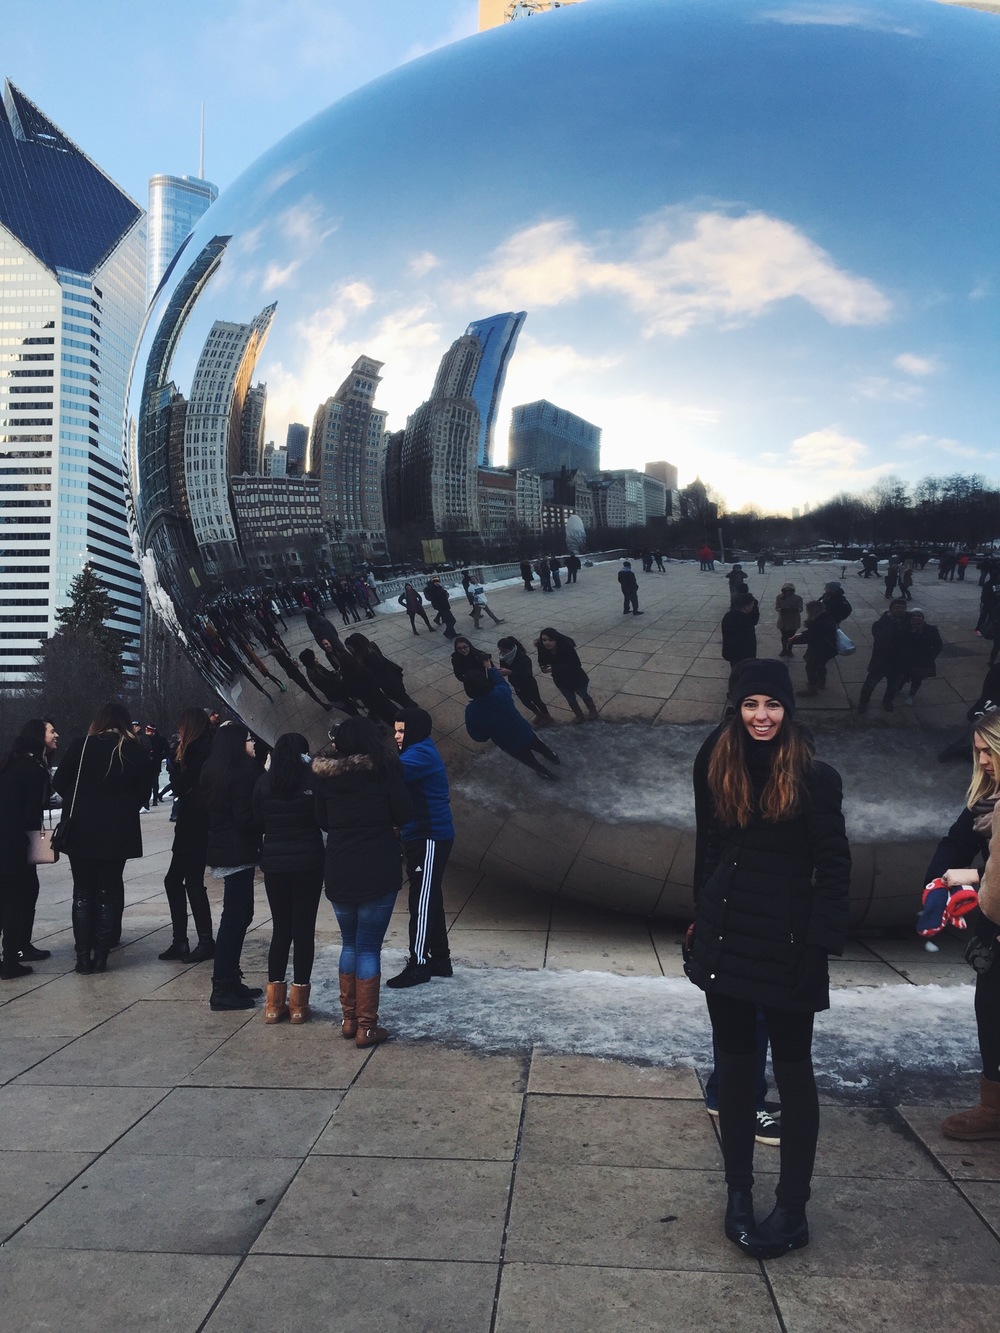 Go see the bean, it is so cool!